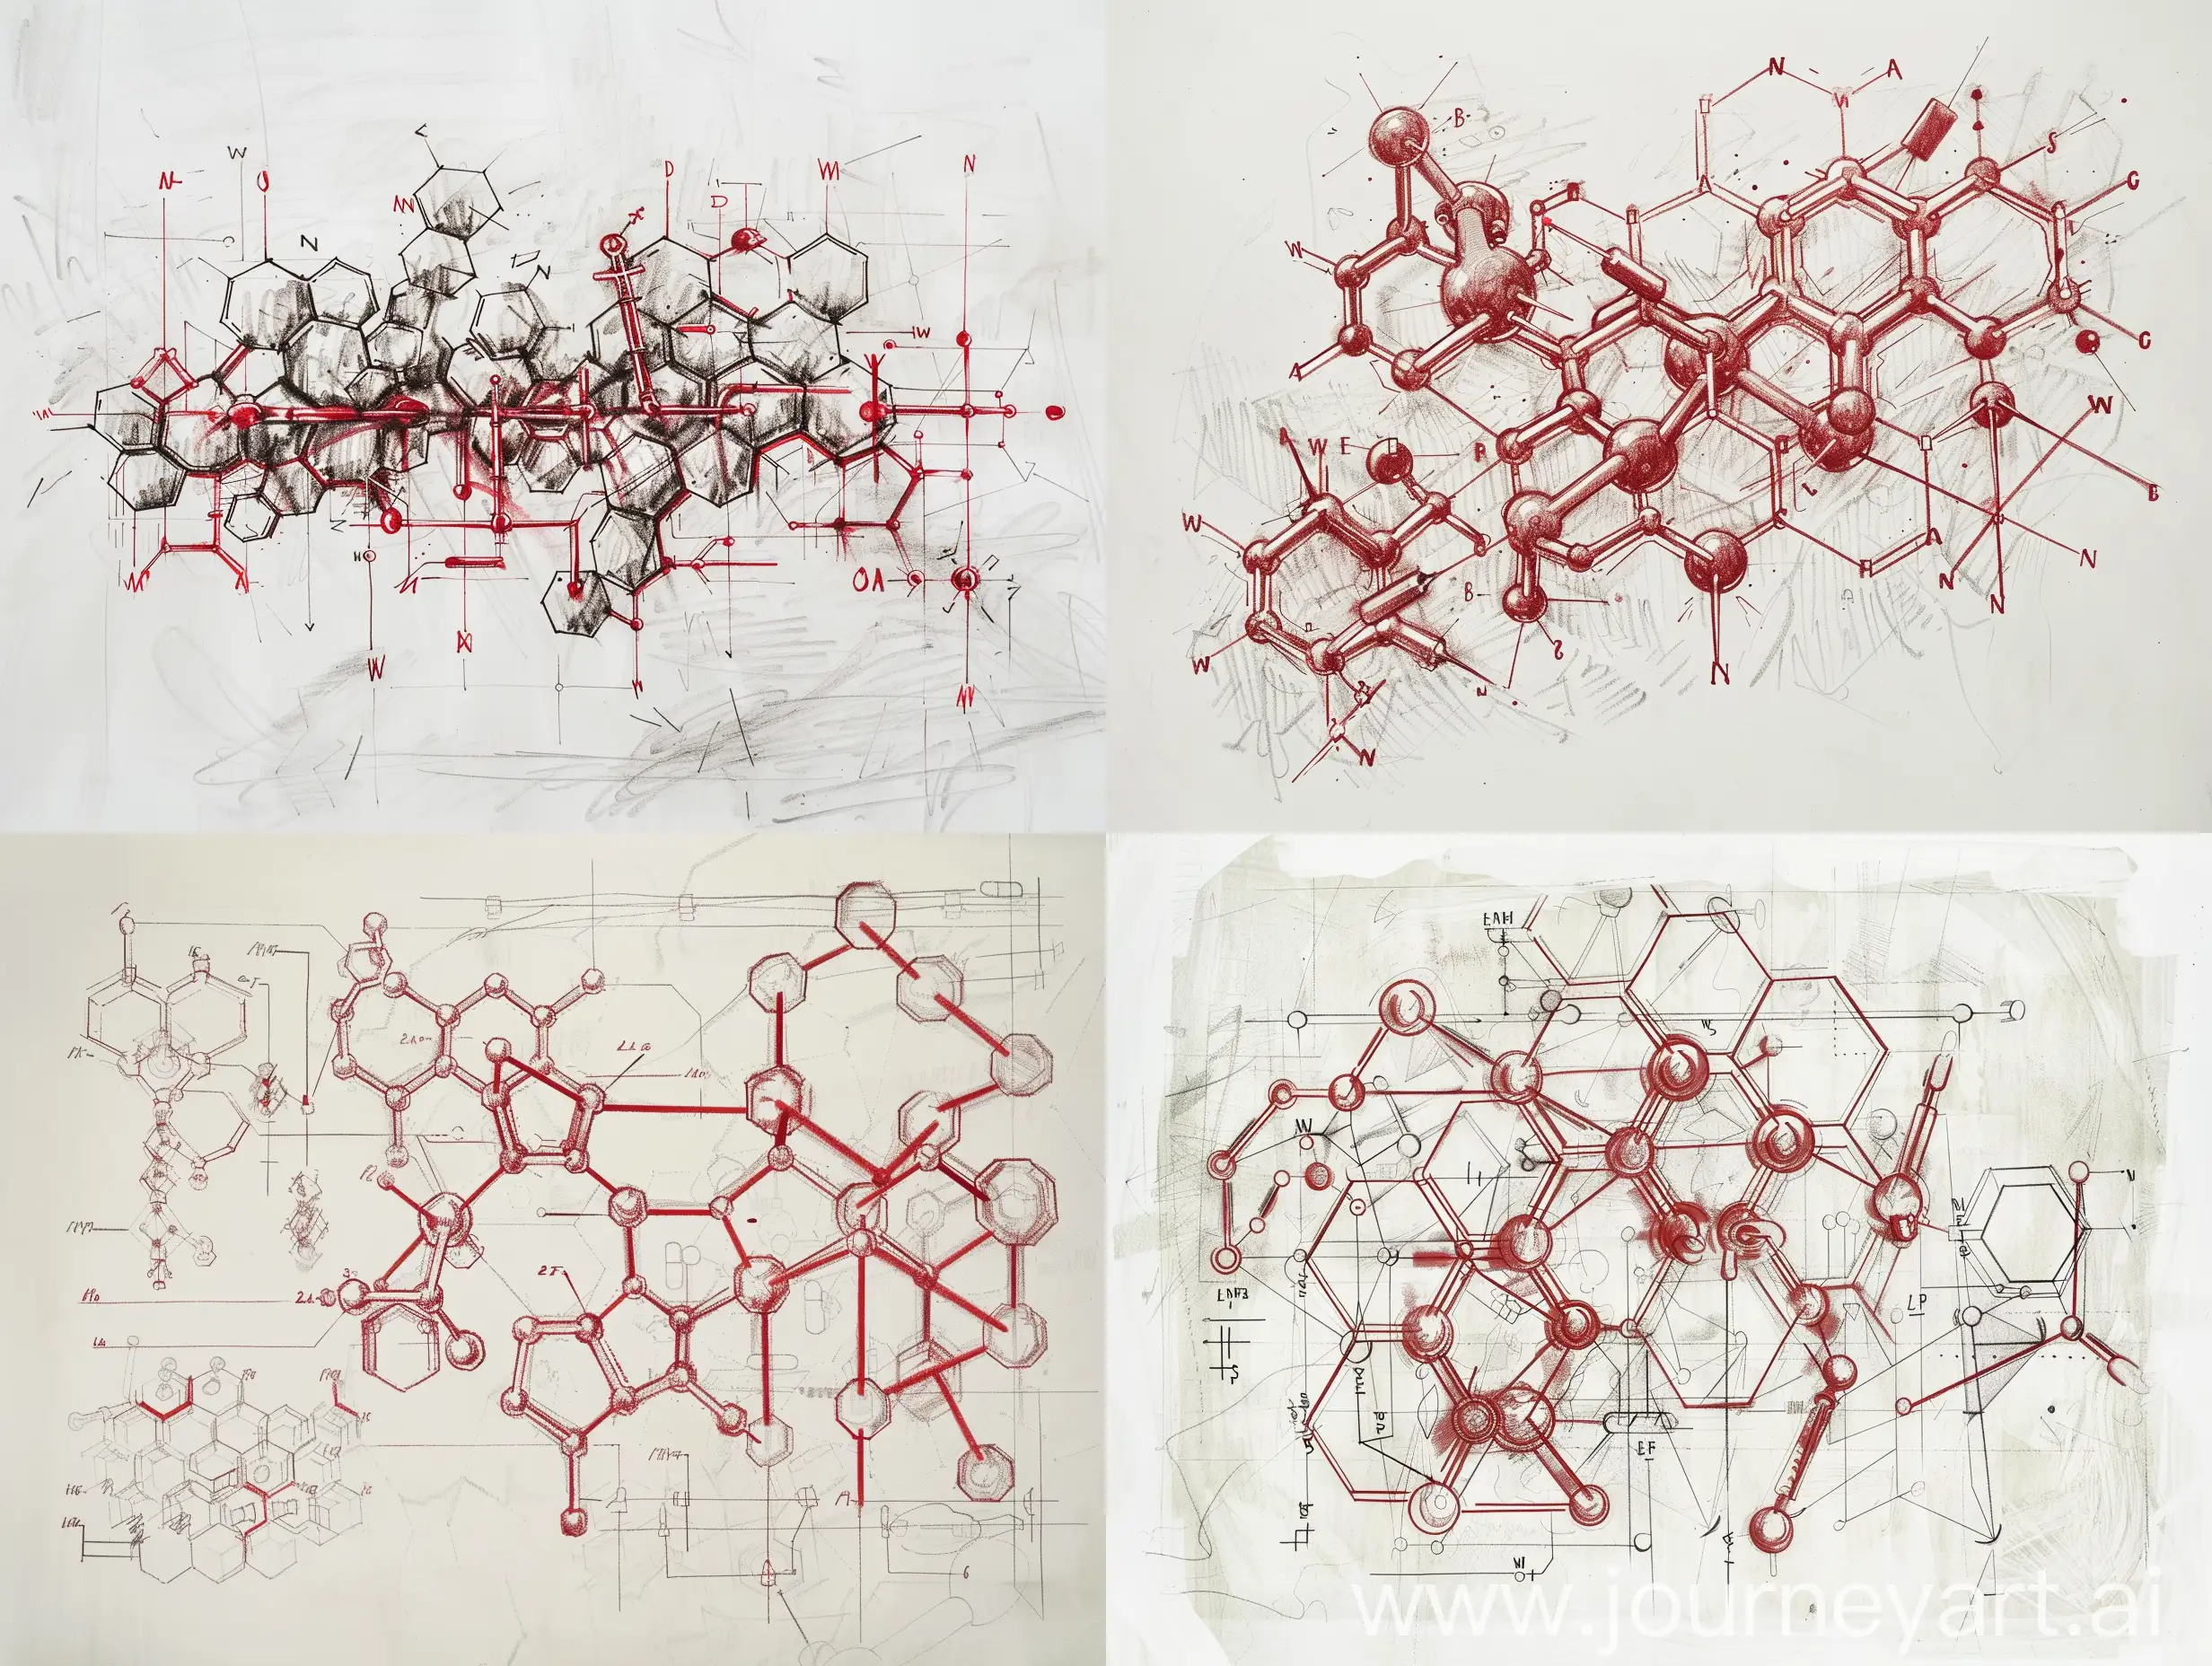 Pencil-Sketch-Diagrams-of-AntiAging-Chemical-Structures-on-White-Background-with-Red-Ink